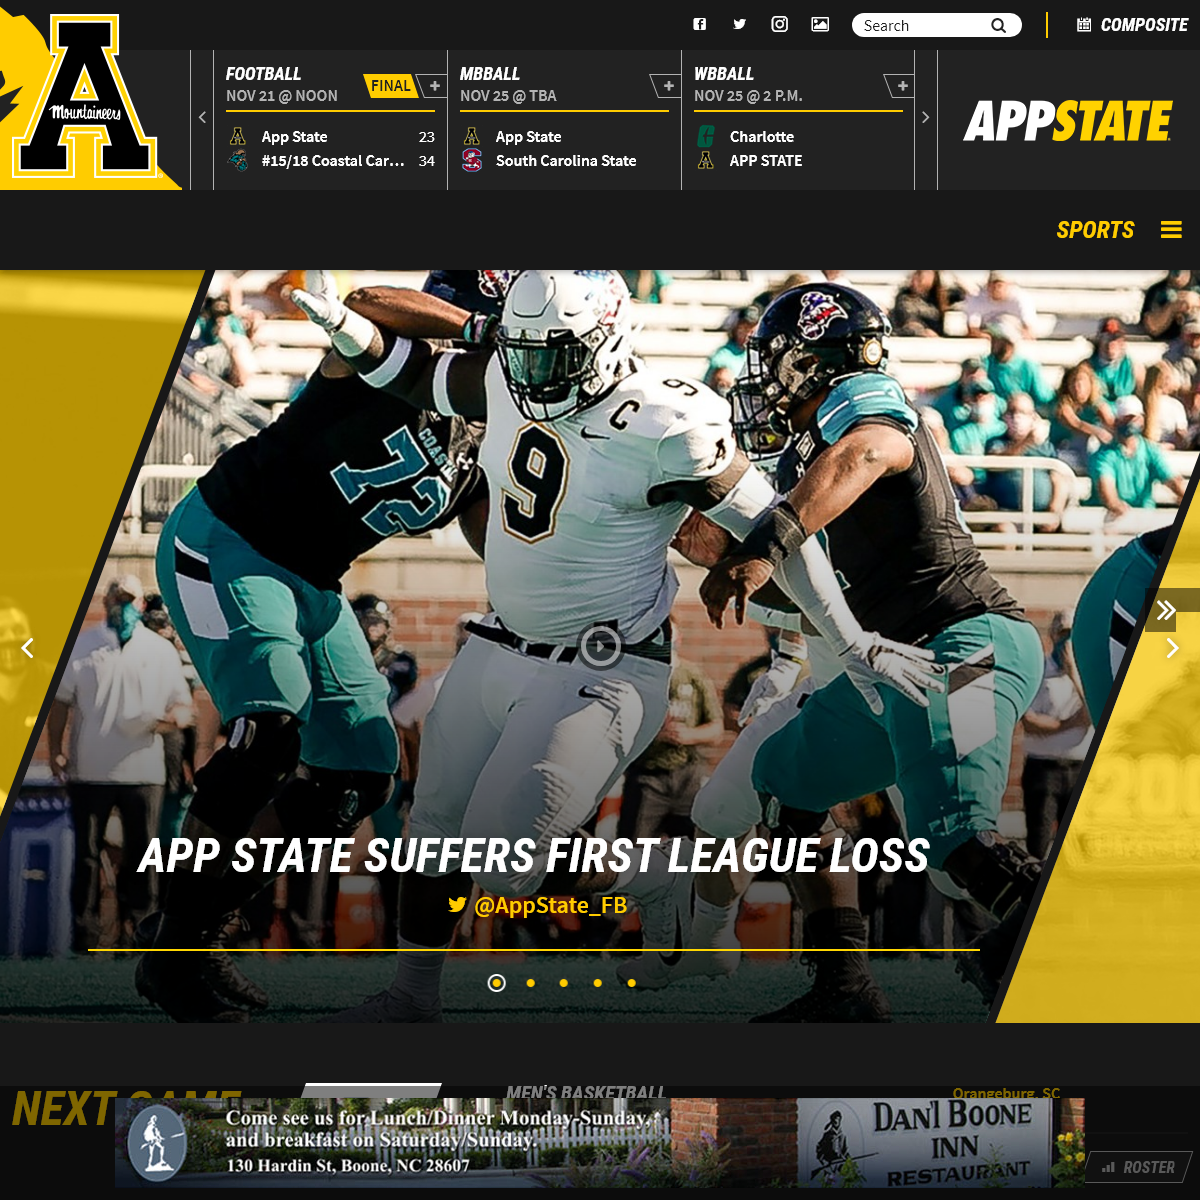 A complete backup of appstatesports.com